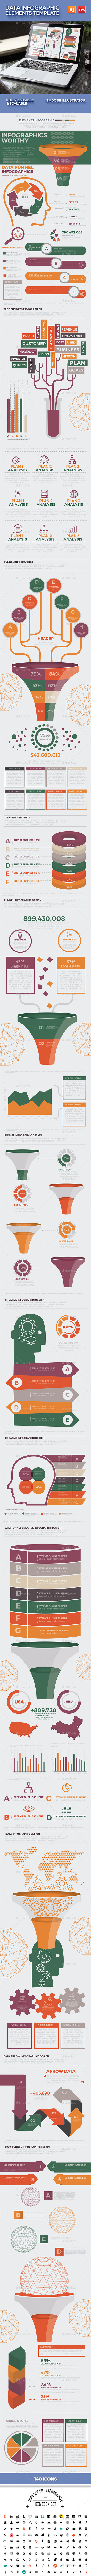 Data Filter Infographics Design in Infographic Templates